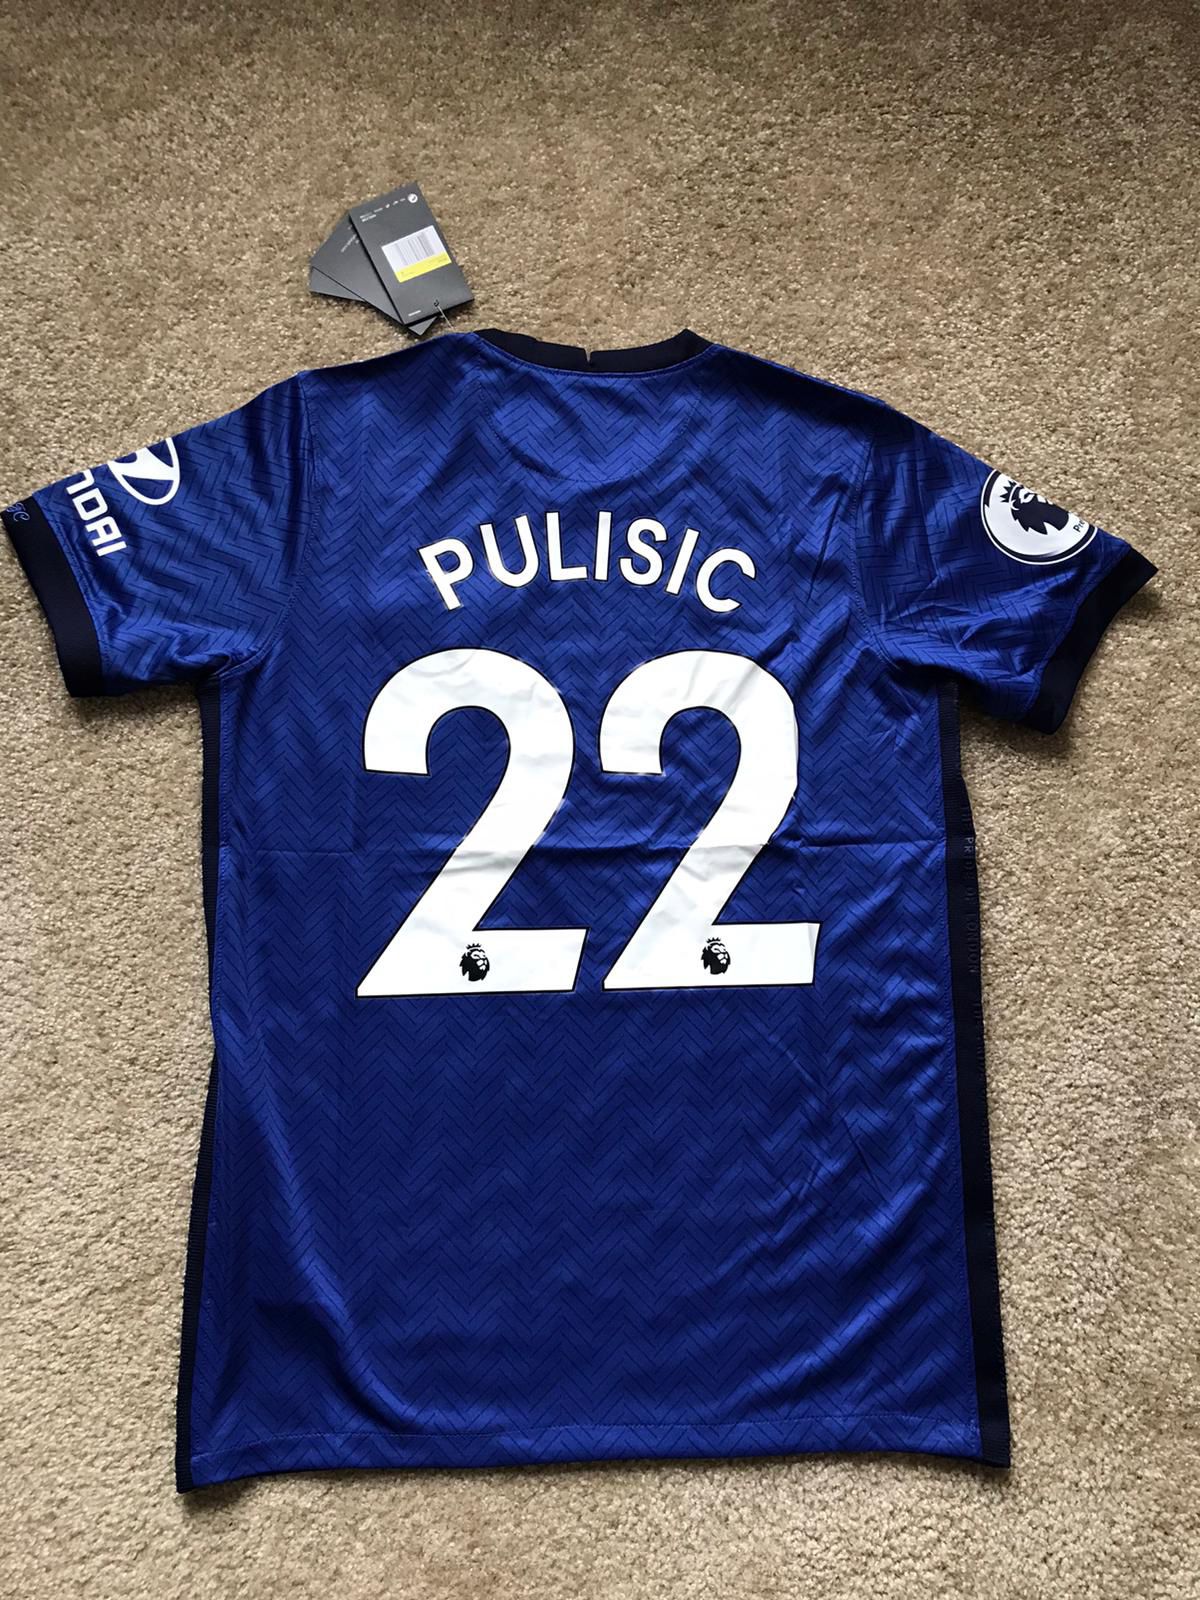 NEW Pulisic Chelseal Home 20/21 Jersey - M, L, XL